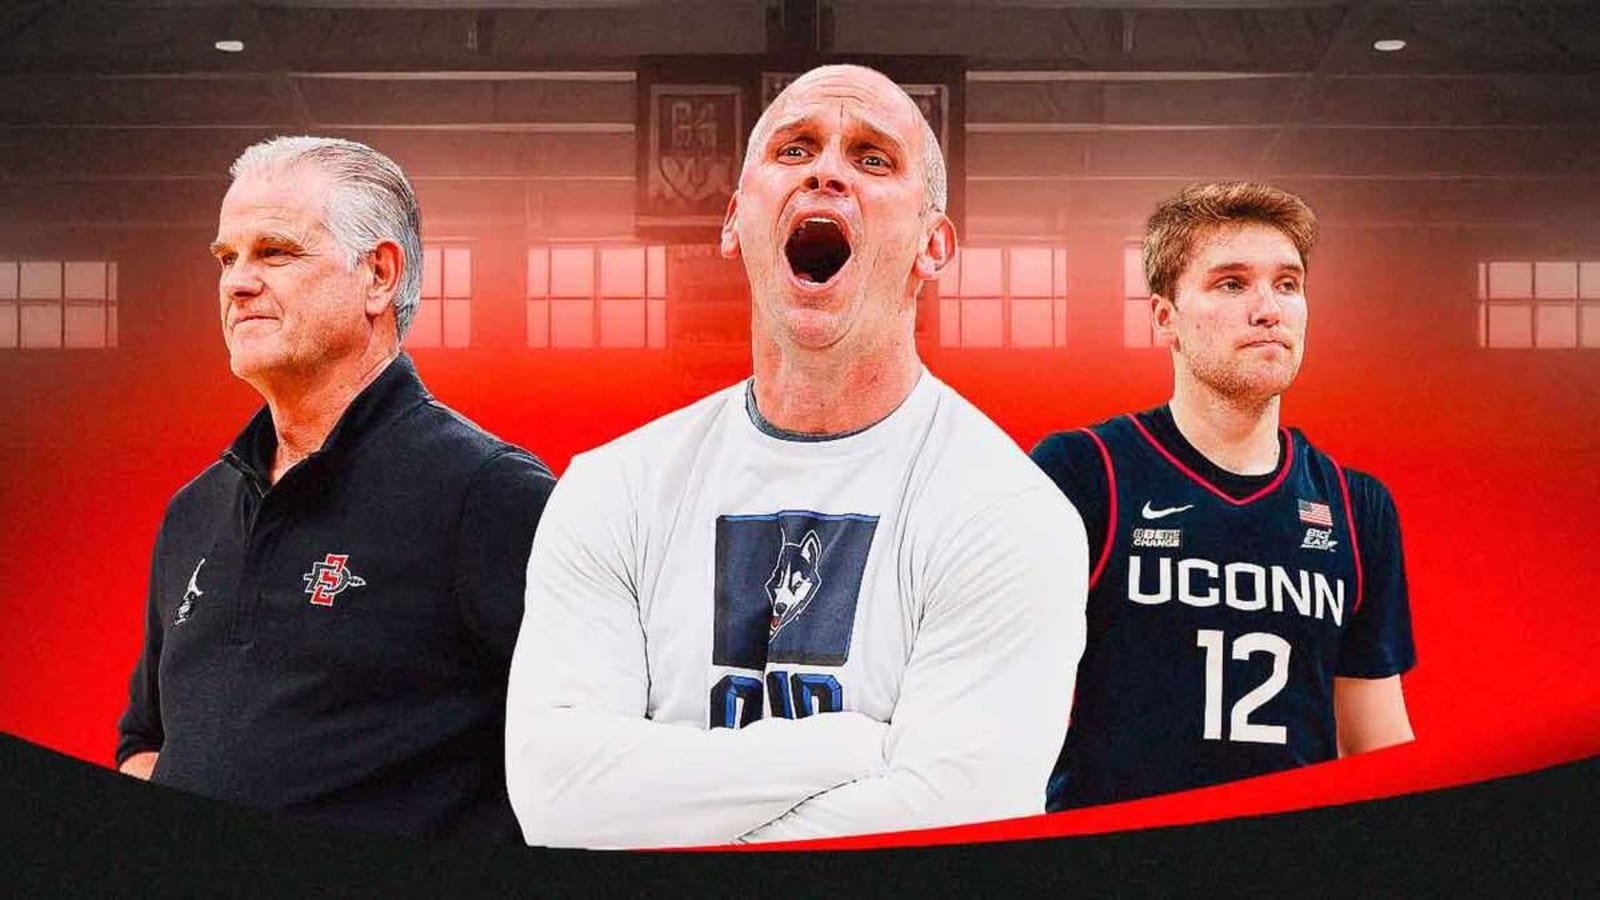 San Diego State’s Brian Dutcher gets 100% real about experience after brutal loss to UConn